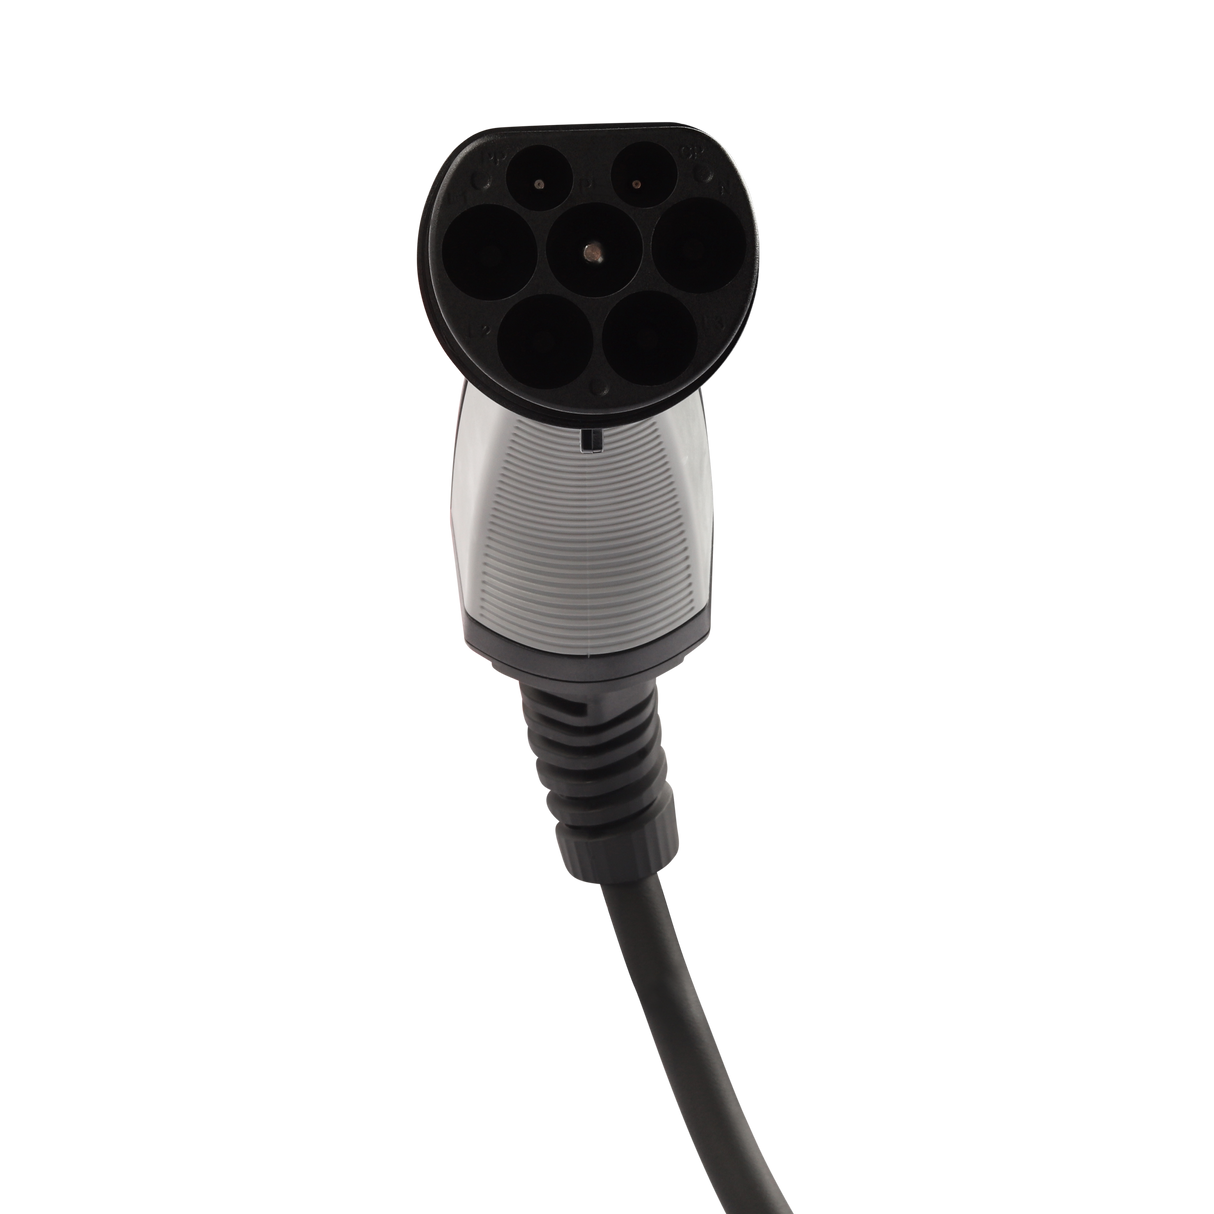 Charging cable Polestar 2 - Erock Pro Type 2 - 16A 3 phase (11 kW)